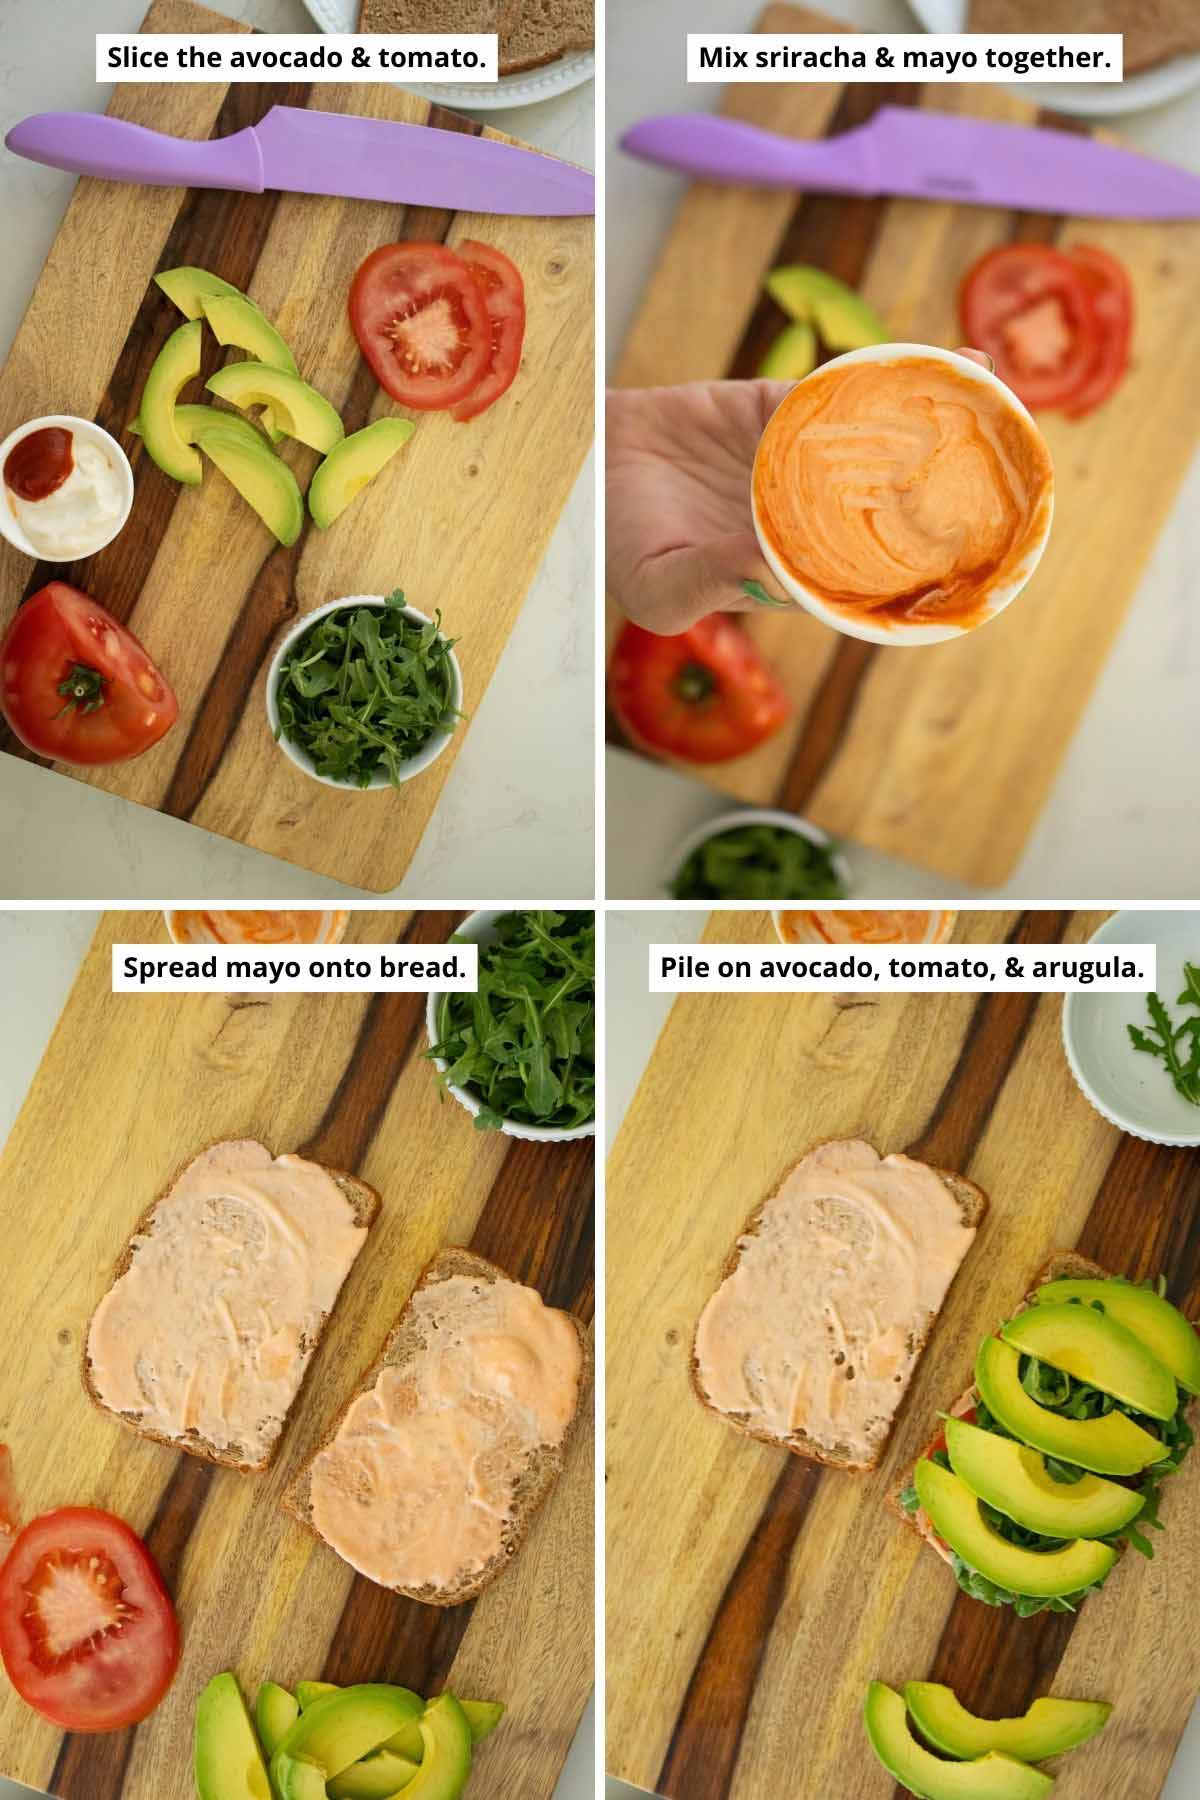 collage showing sliced avocado and tomato on the cutting board, the sriracha mayo after mixing and after spreading on the bread, and the avocado and veggies on the bread before closing the sandwich